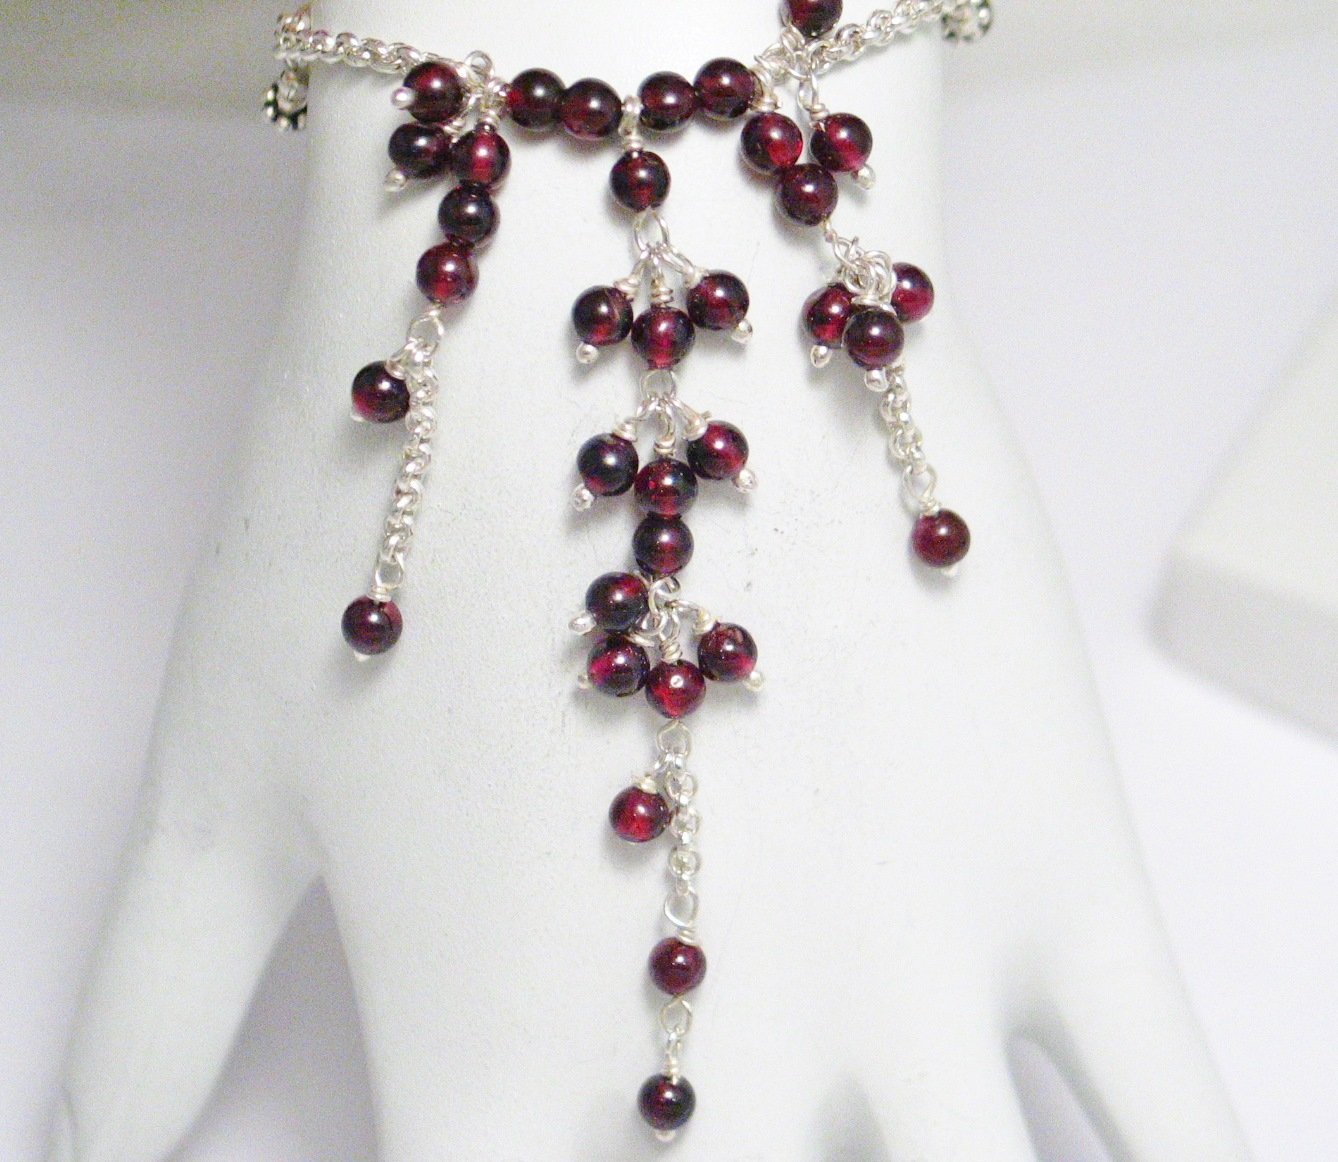 Bead Necklaces | Sterling Silver Garnet Bead Y Necklace | Discount Overstock Jewelry online at Blingschlingers